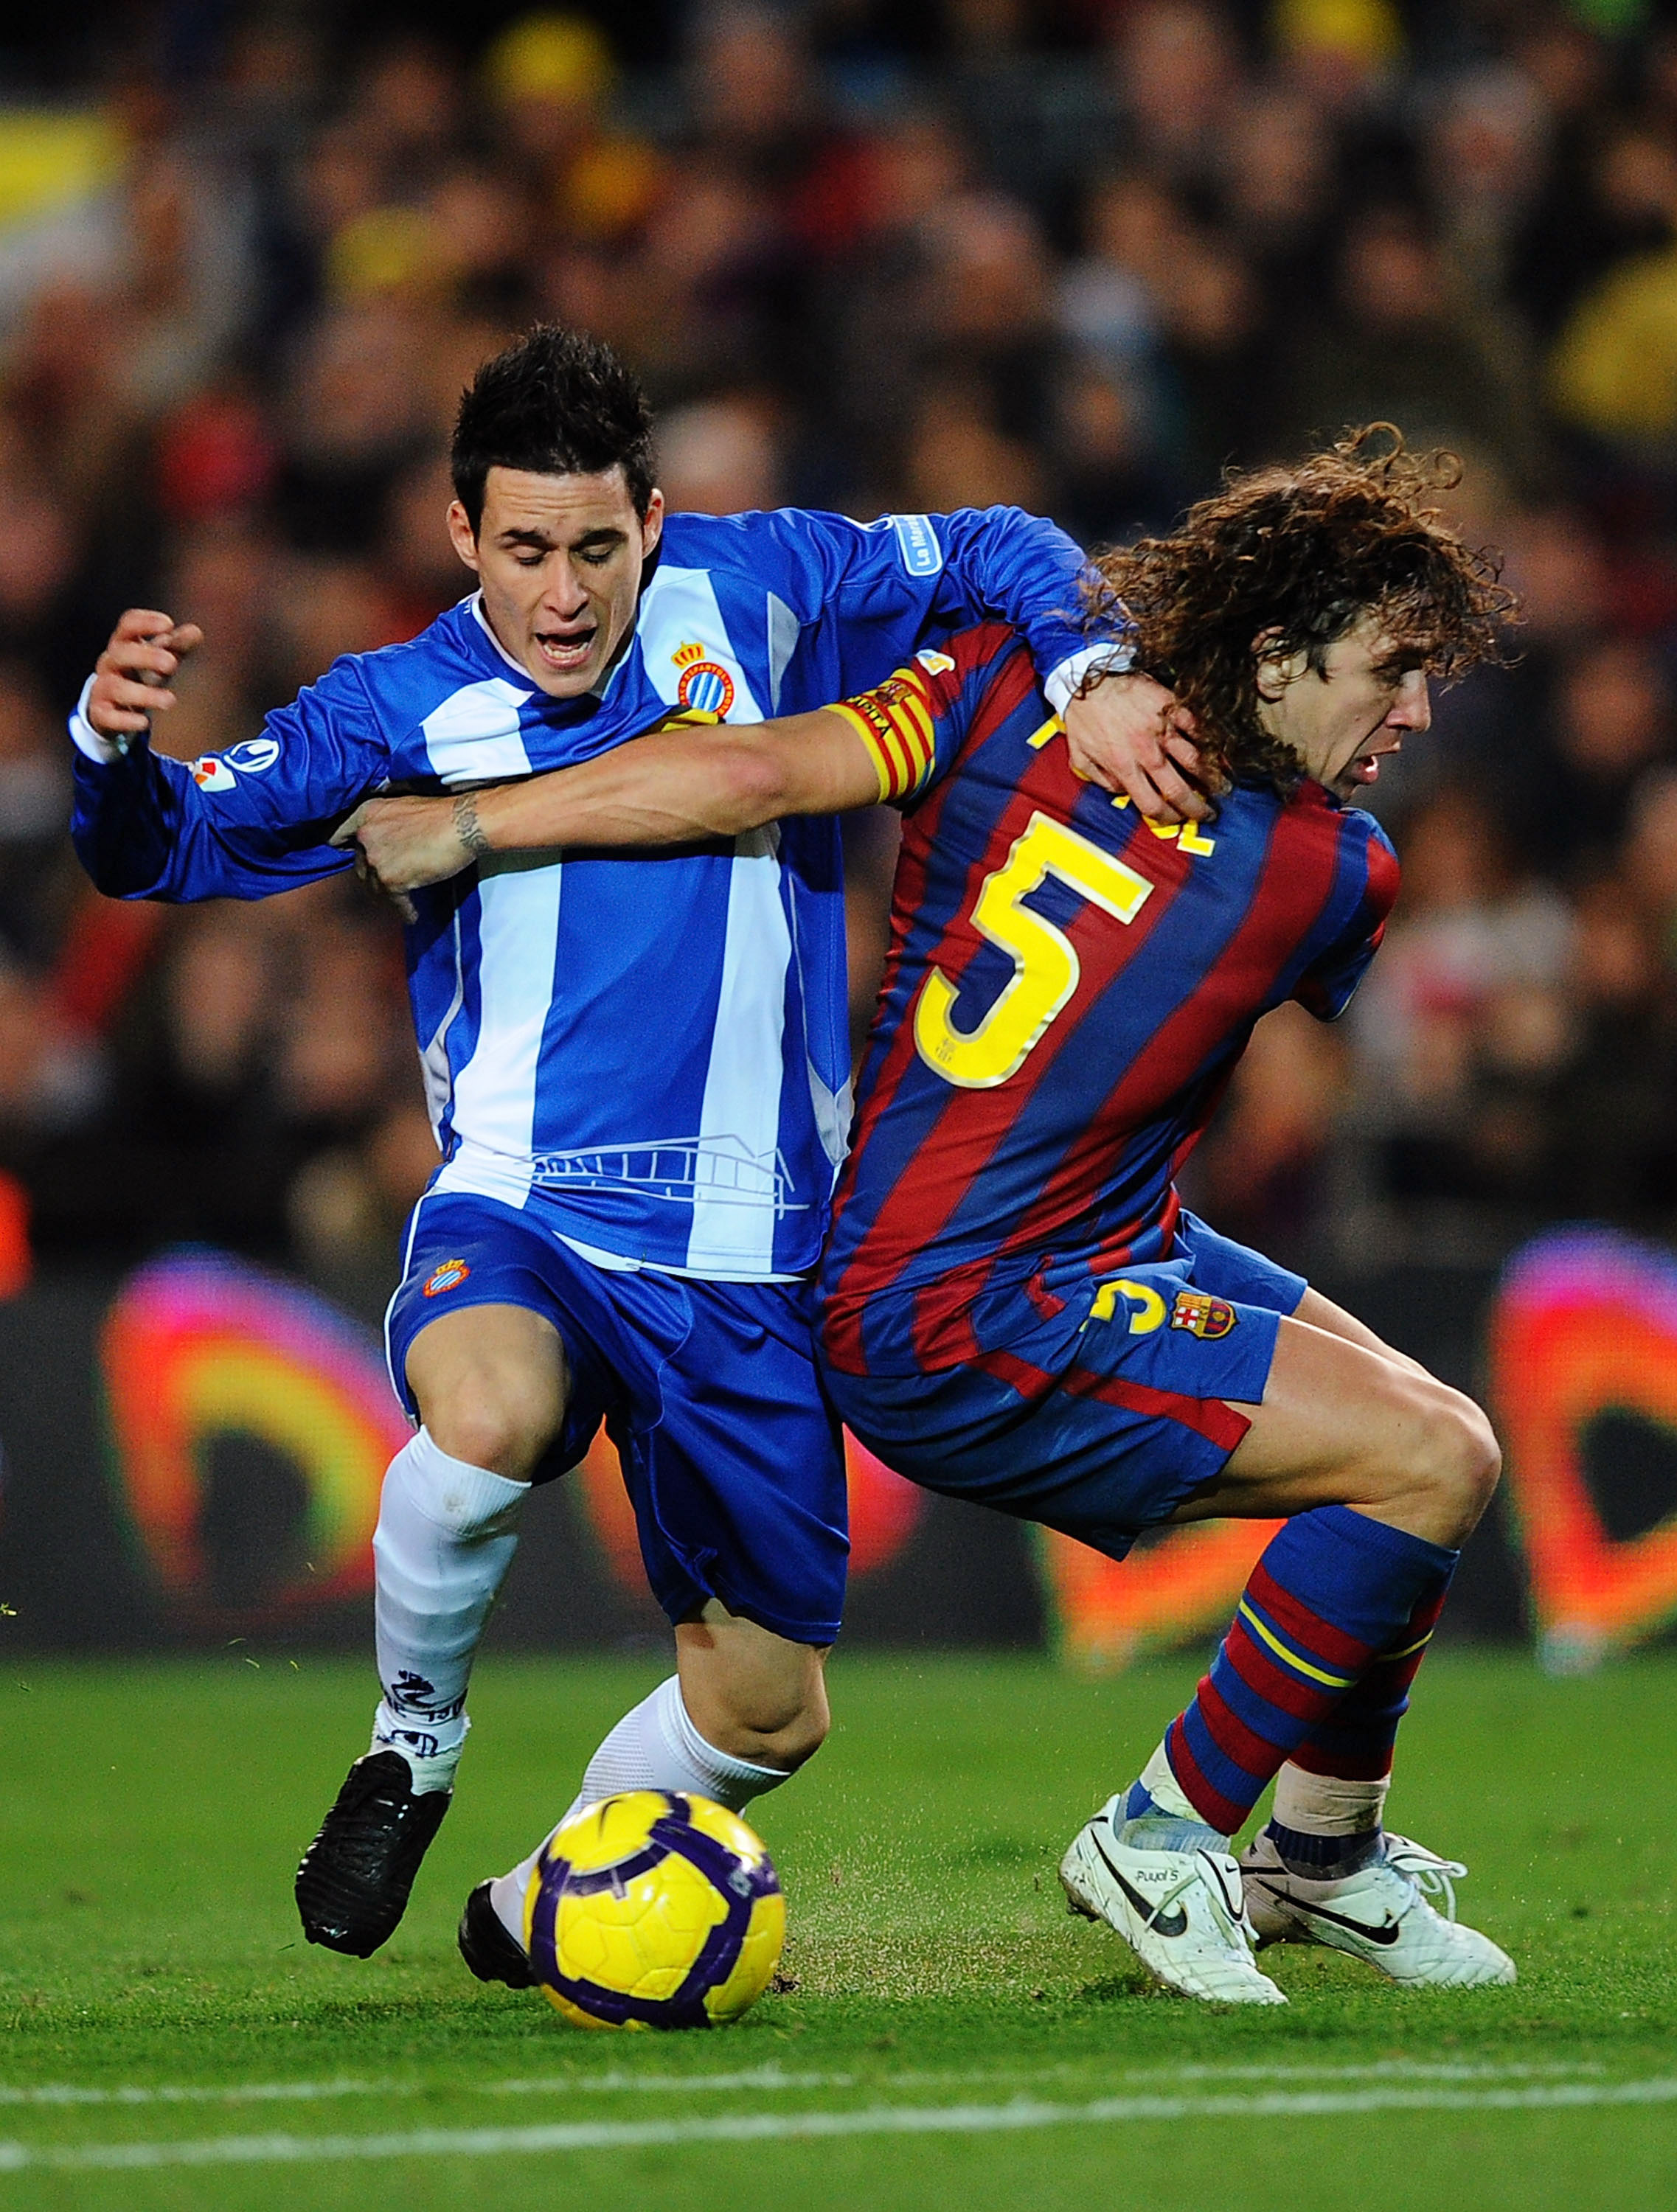 BARCELONA, SPAIN - DECEMBER 12: Carles Puyol (R) of Barcelona holds back Jose Callejon of Espanyol   during the La Liga match between Barcelona and  Espanyol at the Camp Nou stadium Stadium on December 12, 2009 in Madrid, Spain.  (Photo by Denis Doyle/Get